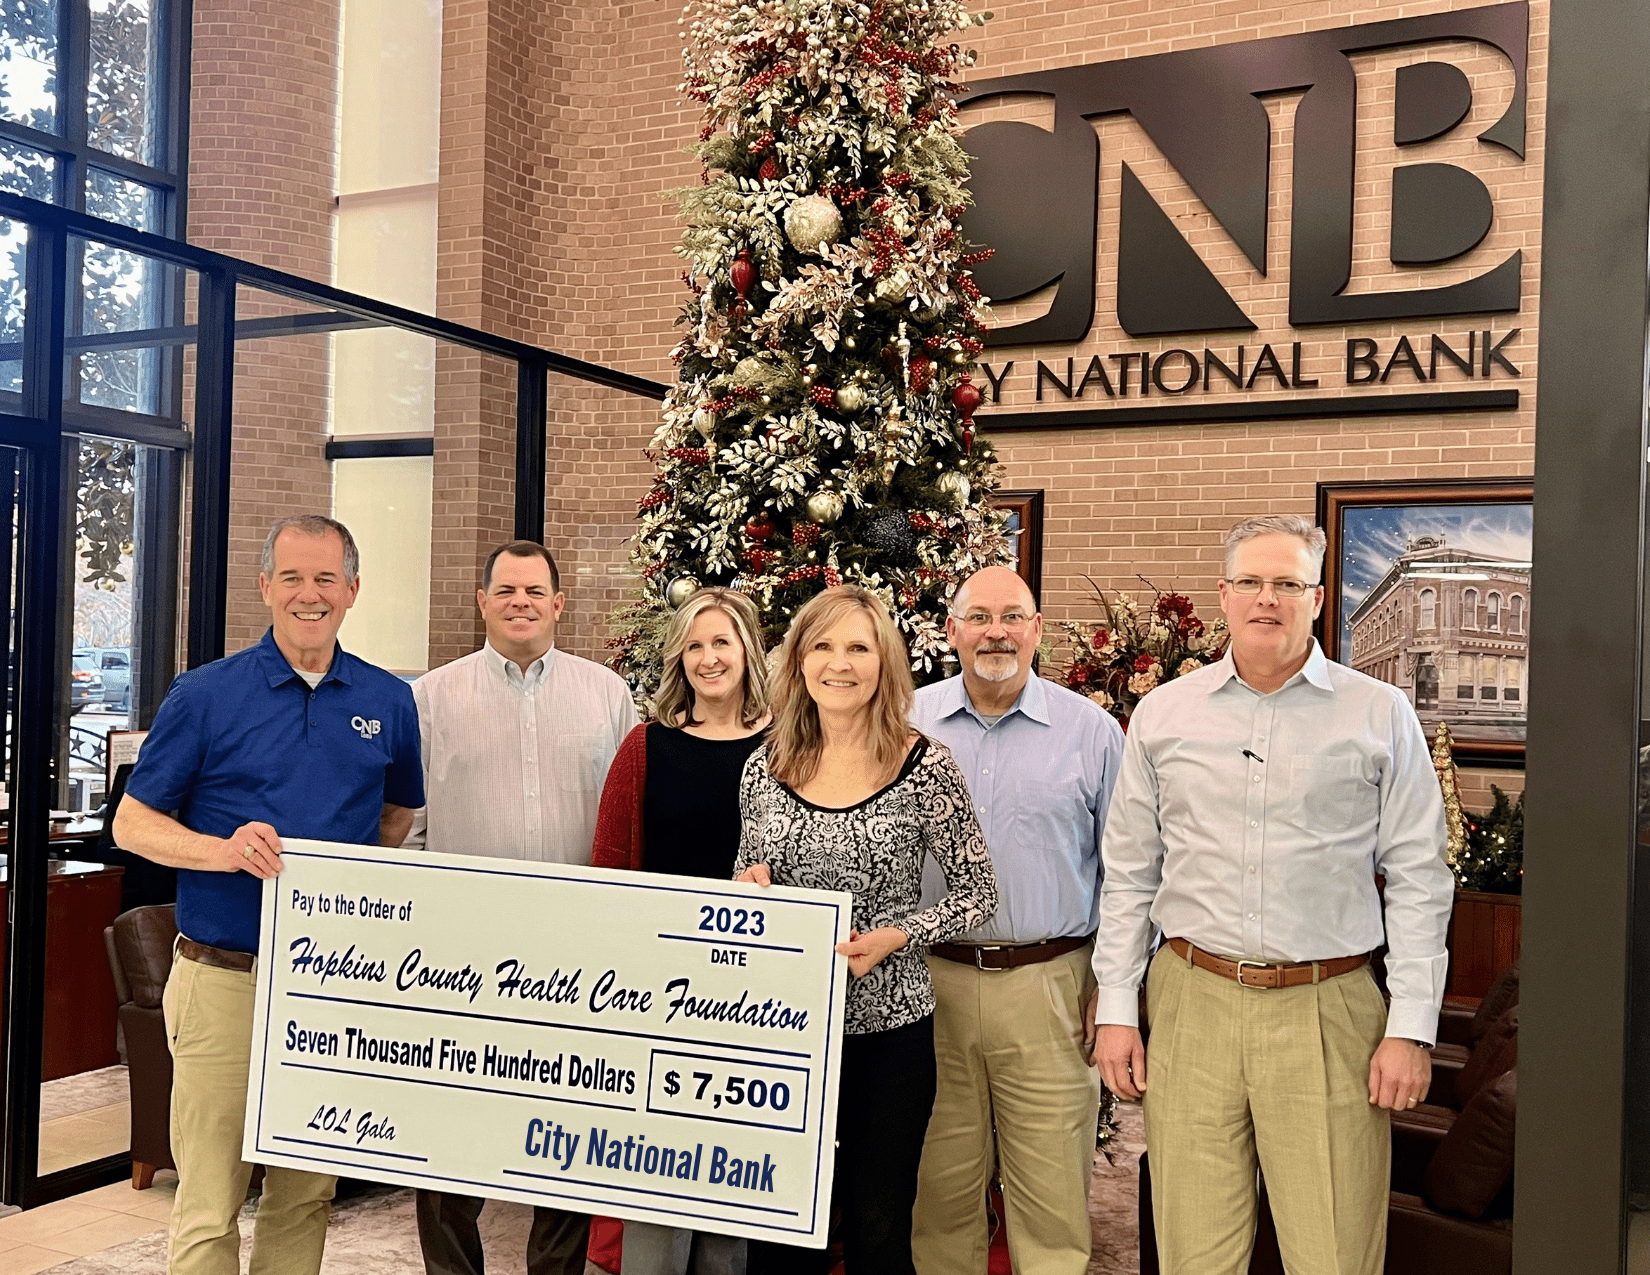 Hopkins County Health Care Foundation With Alliance Bank and CNB Bank